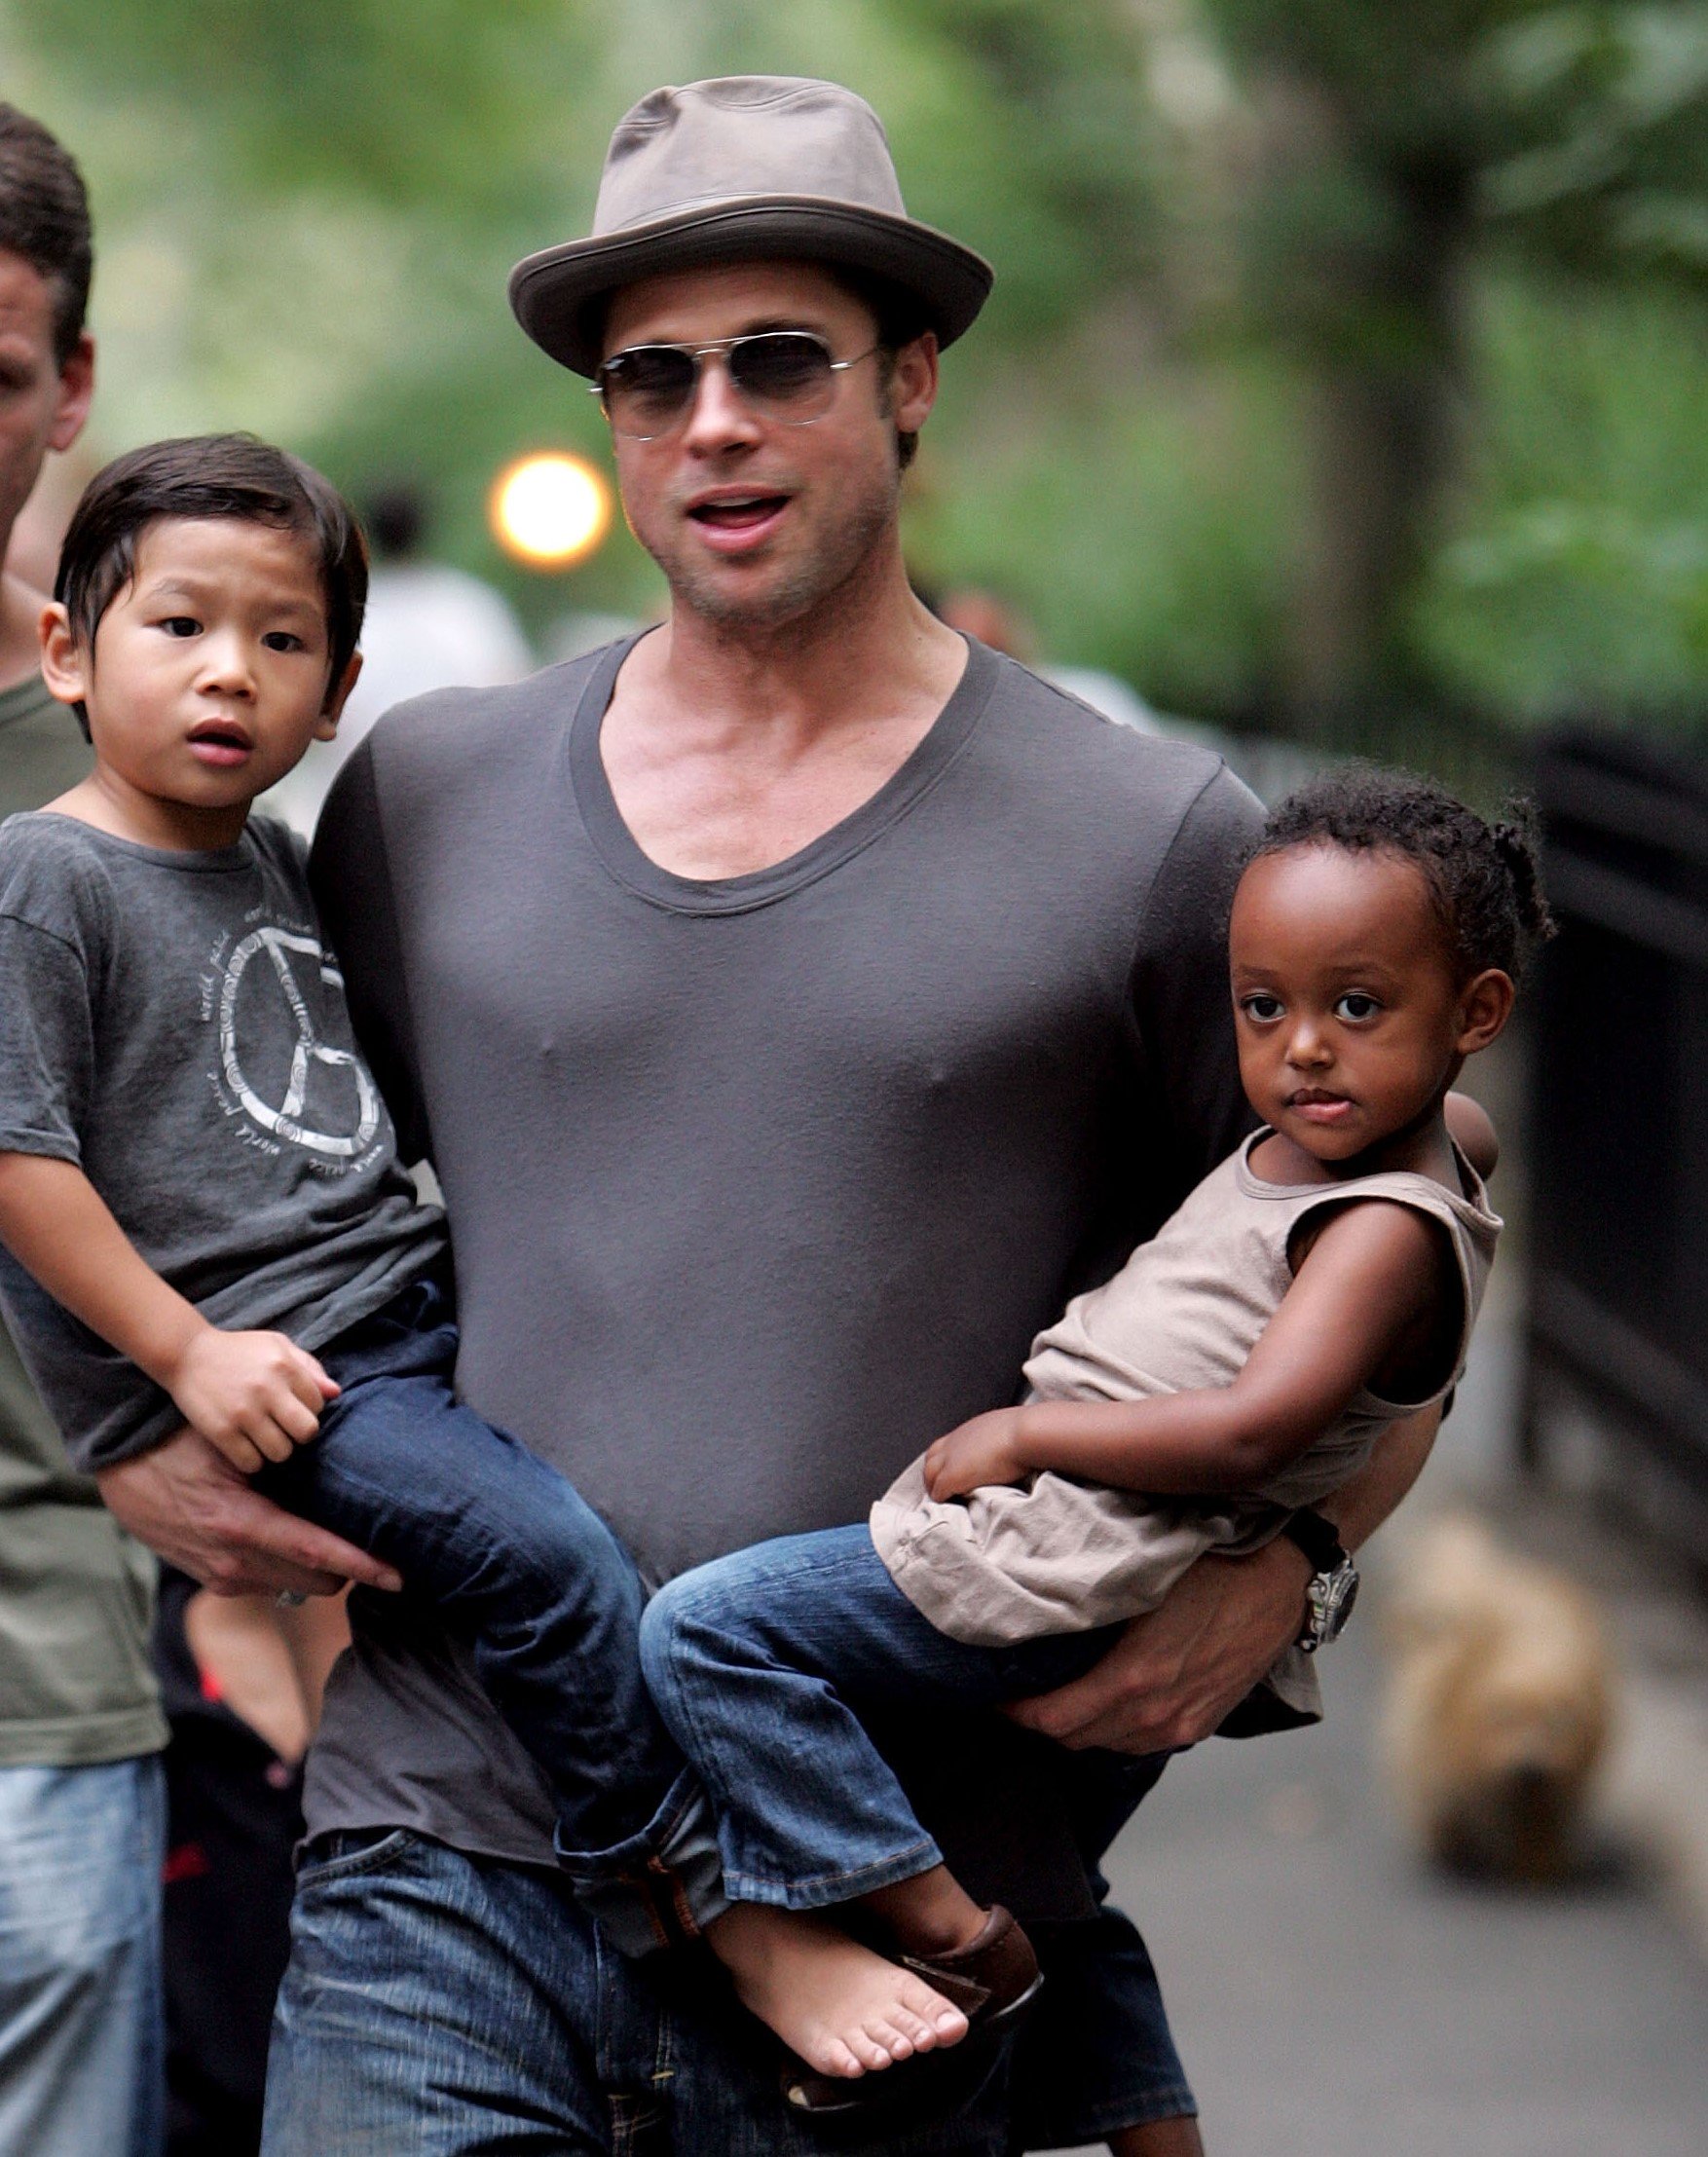 Brad Pitt holding a young Pax on his one side and a young Zahara on the other